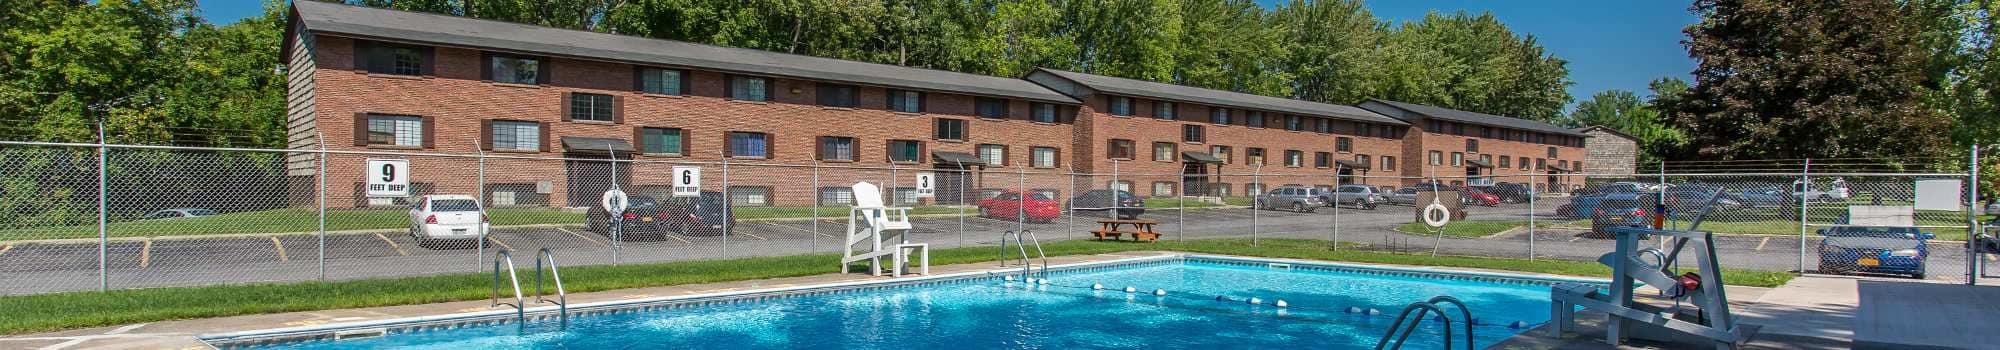 Contact The Residences at Covered Bridge in Liverpool, New York